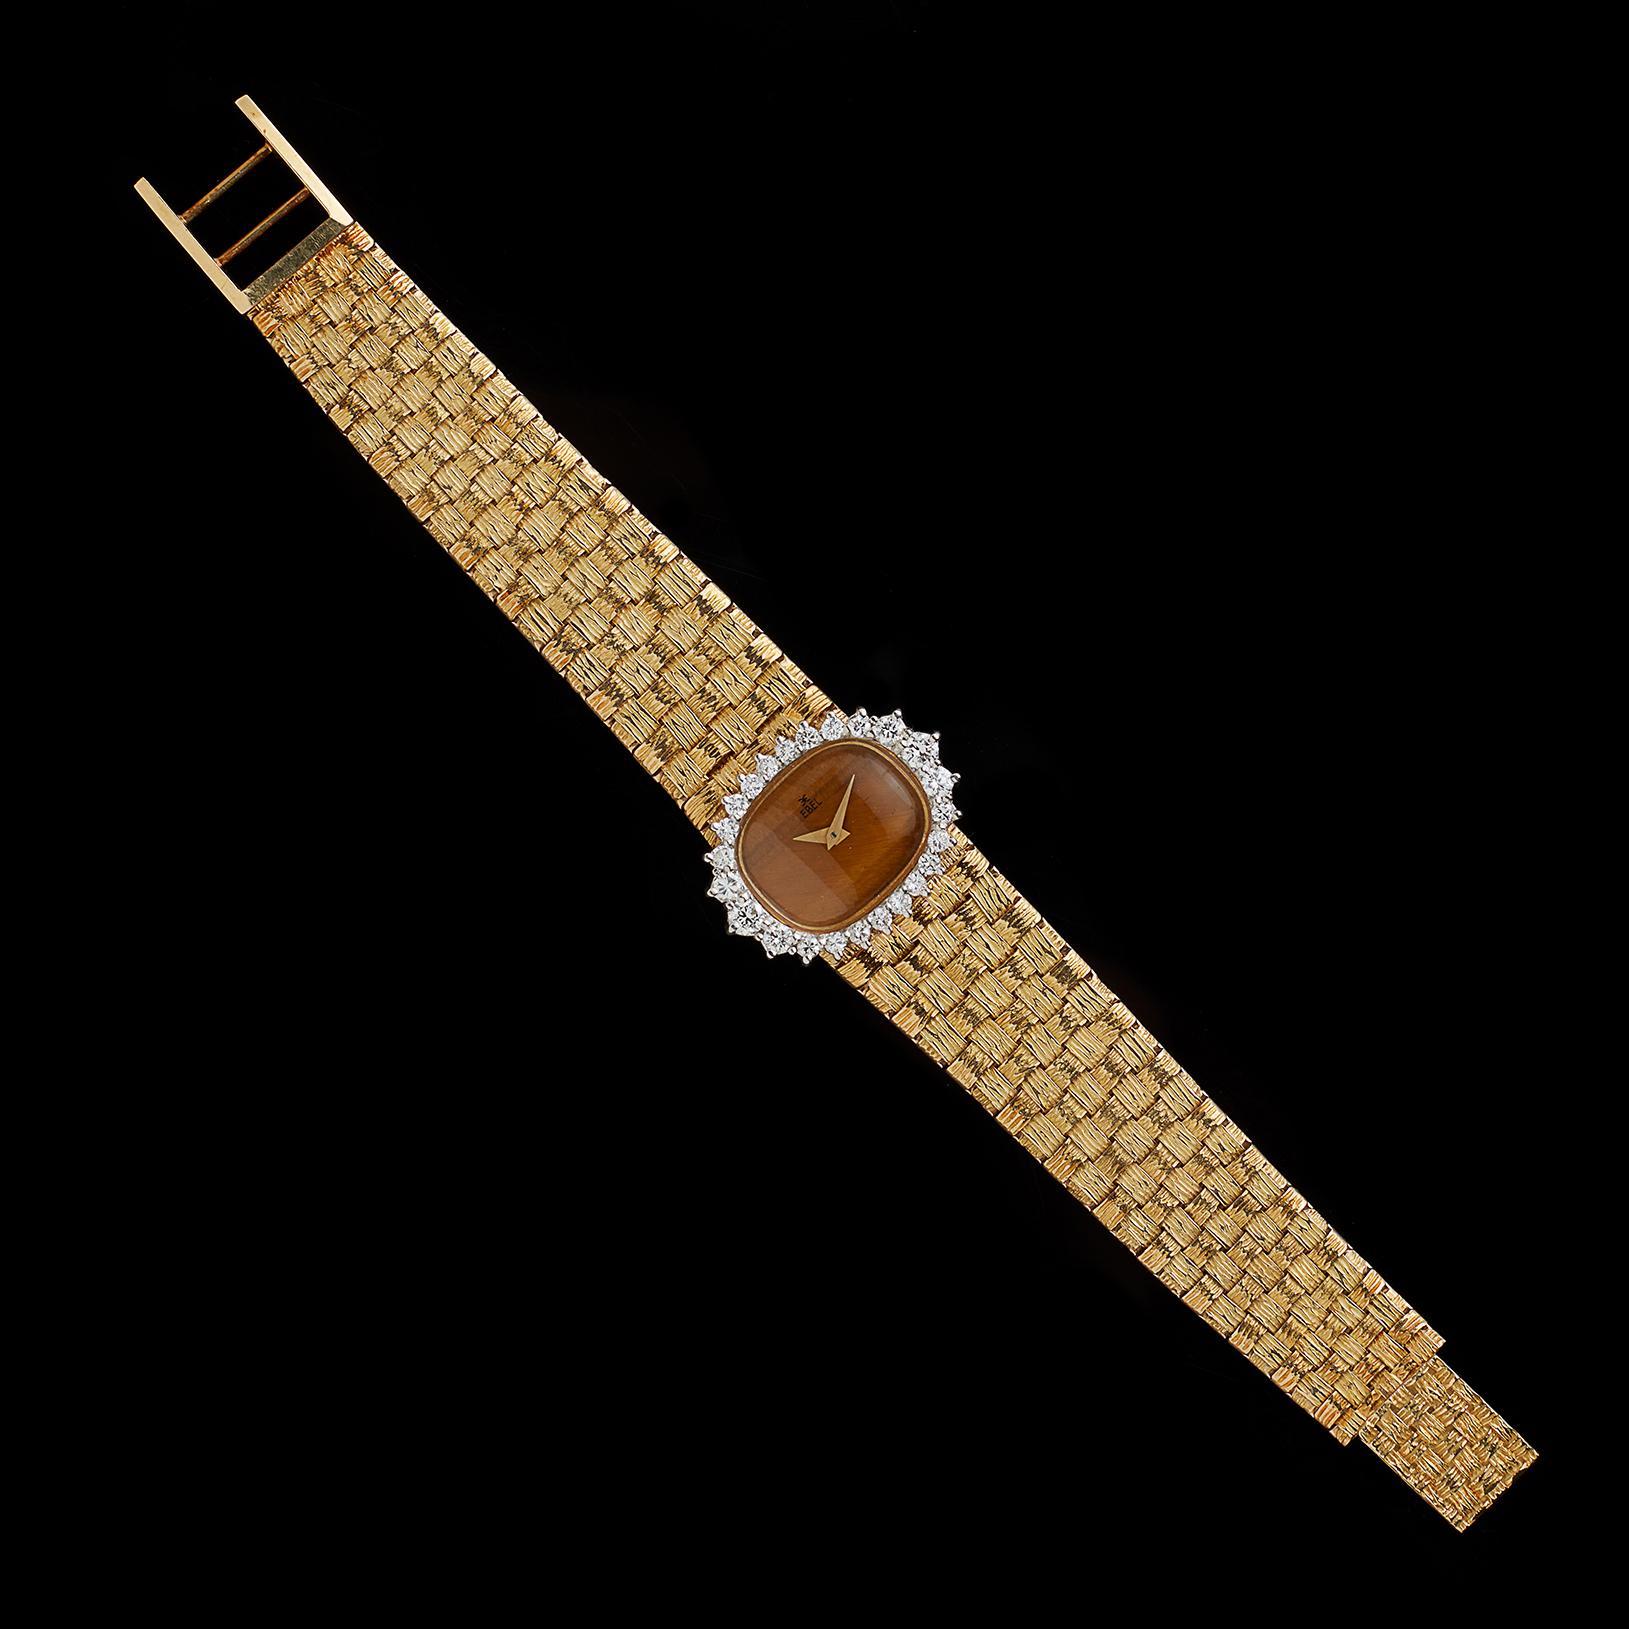 Circa 1970's, this ladies Ebel watch is a unique find! The oval tiger's eye dial is surrounded by 24 round brilliant-cut diamonds, weighing in total approximately 1.00-cts (G-H/VS). And with a tapering, woven mesh gold strap bracelet, telling the